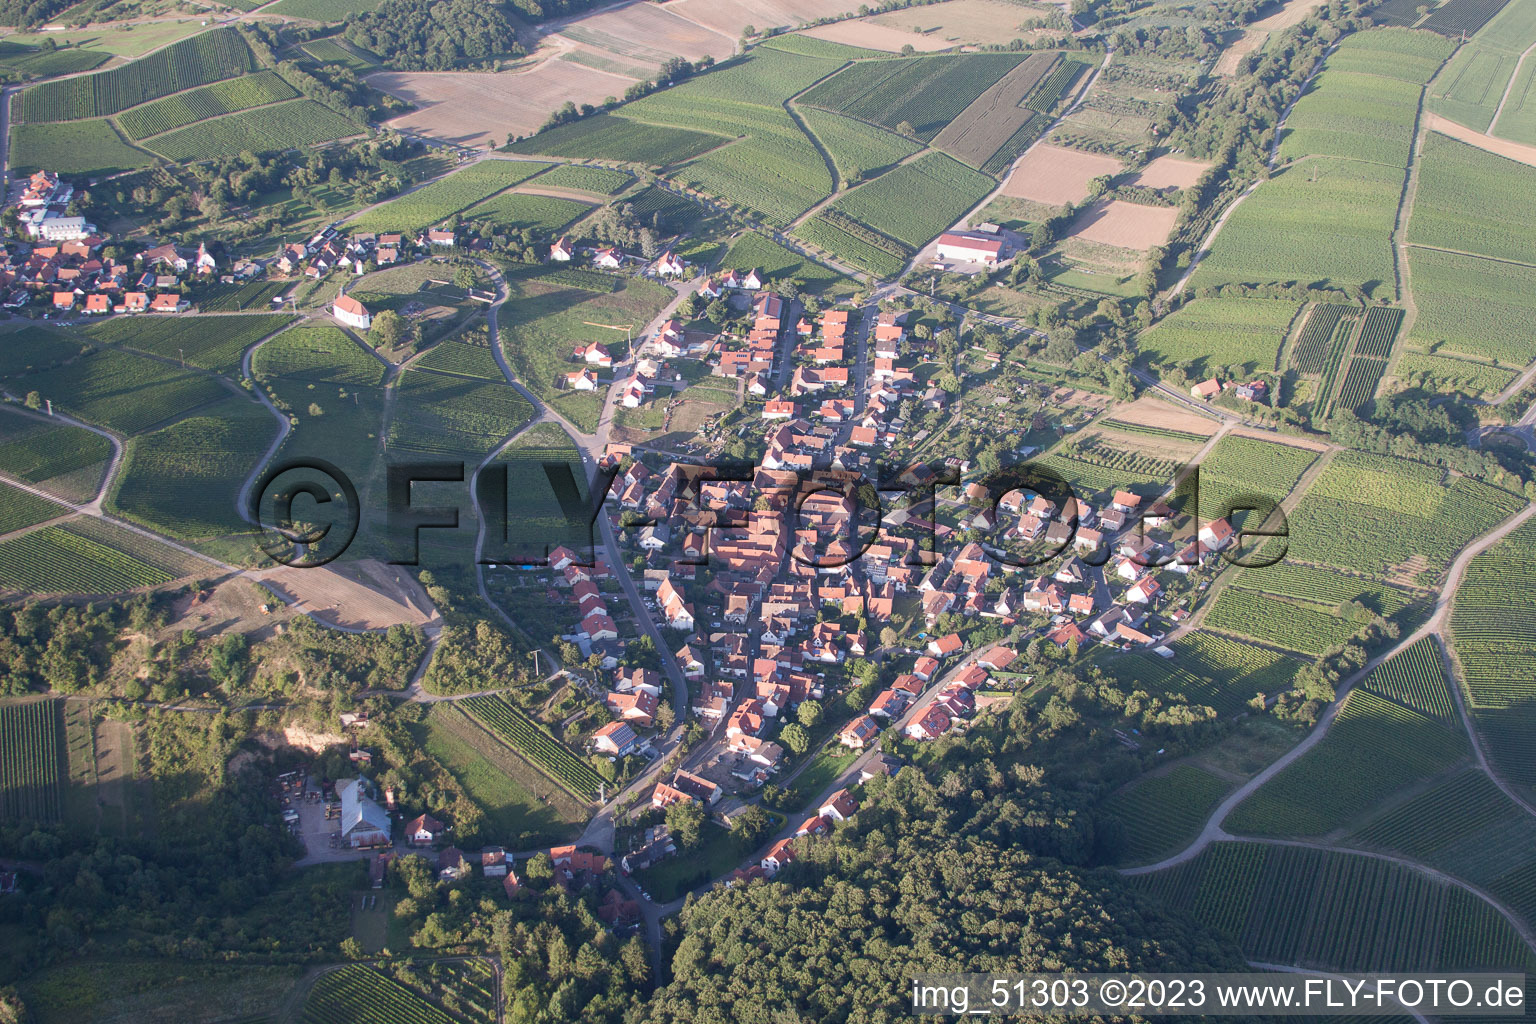 District Gleishorbach in Gleiszellen-Gleishorbach in the state Rhineland-Palatinate, Germany from the drone perspective